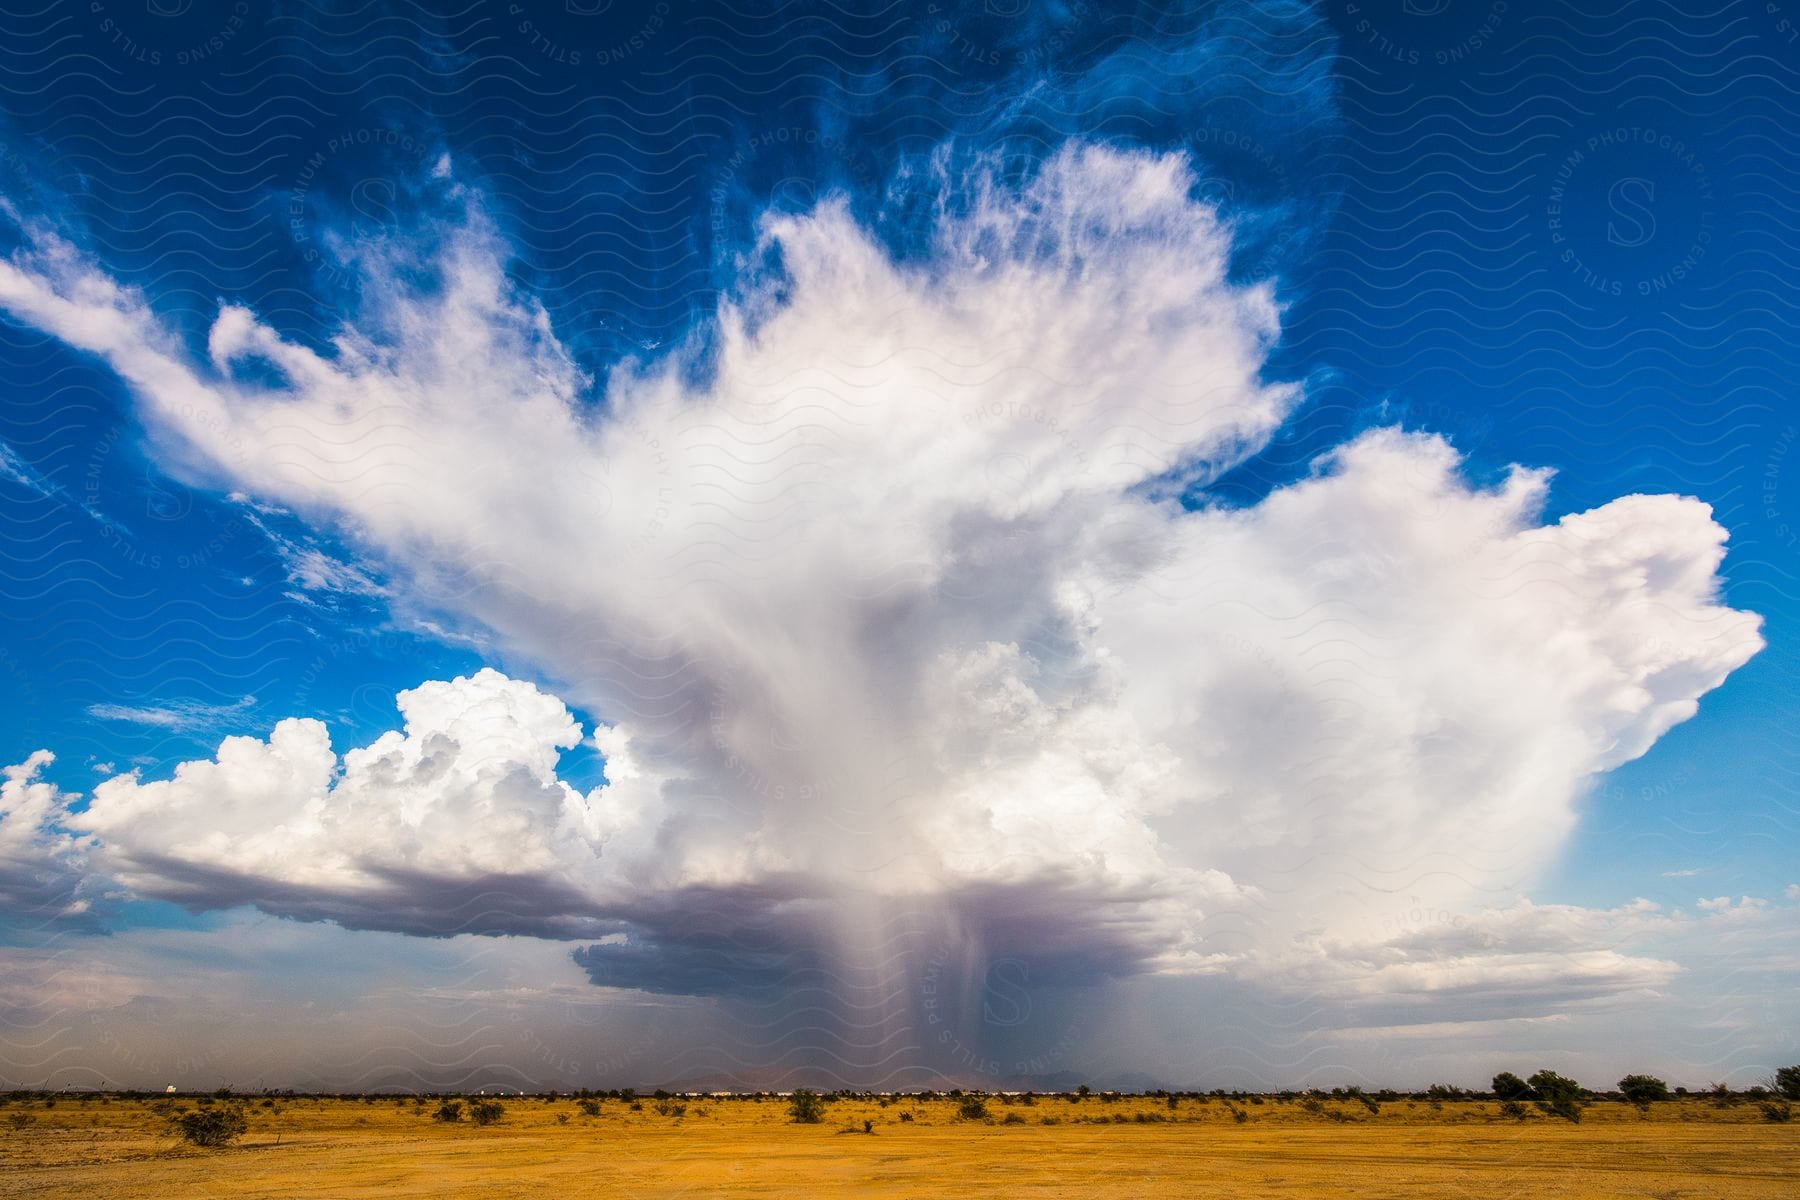 Wingshaped storm clouds tower over an arid landscape against a deep blue sky